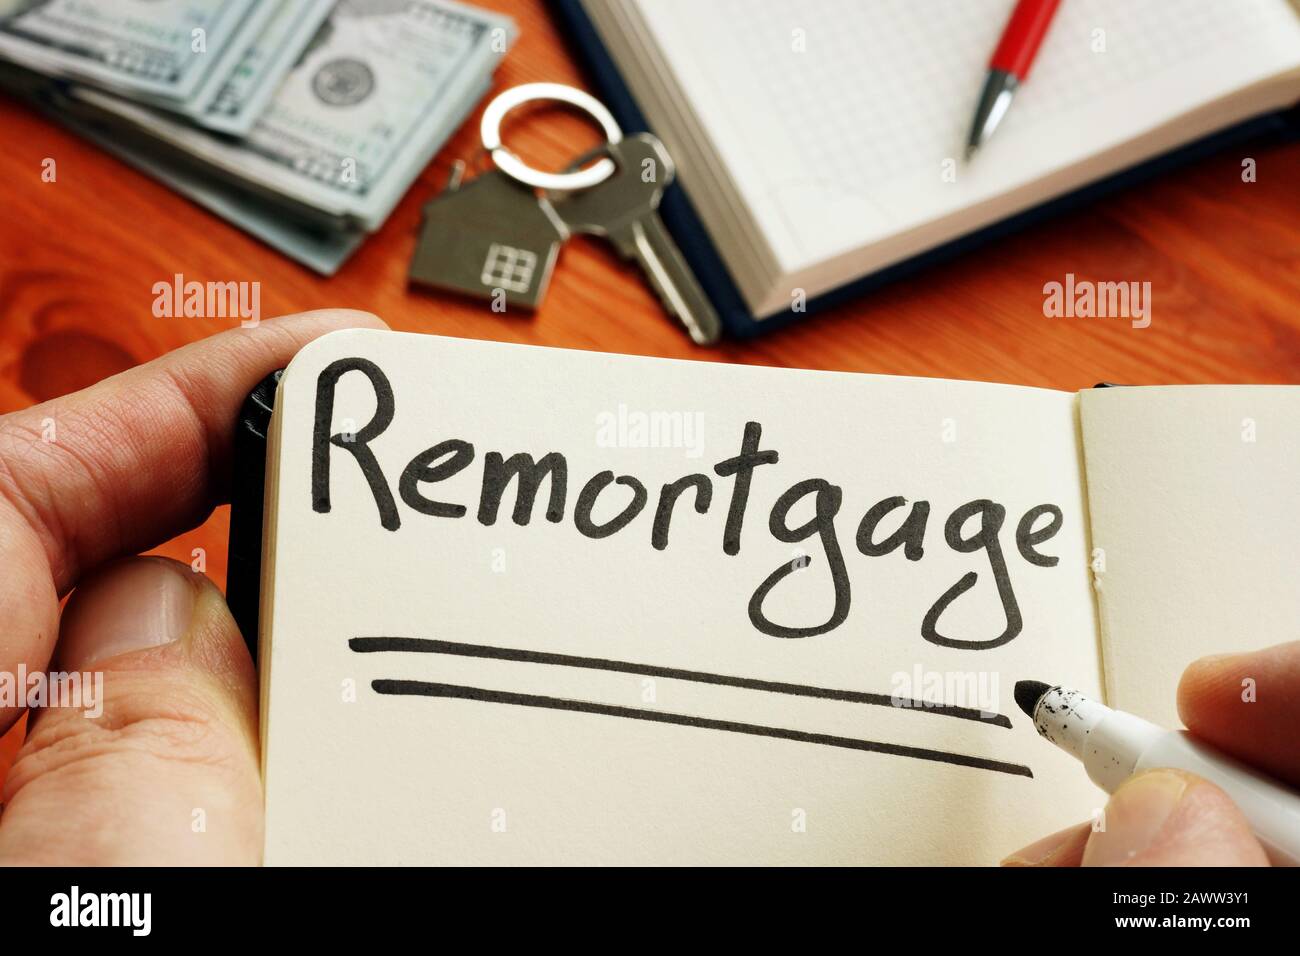 Remortgage handwritten word by man. Stock Photo